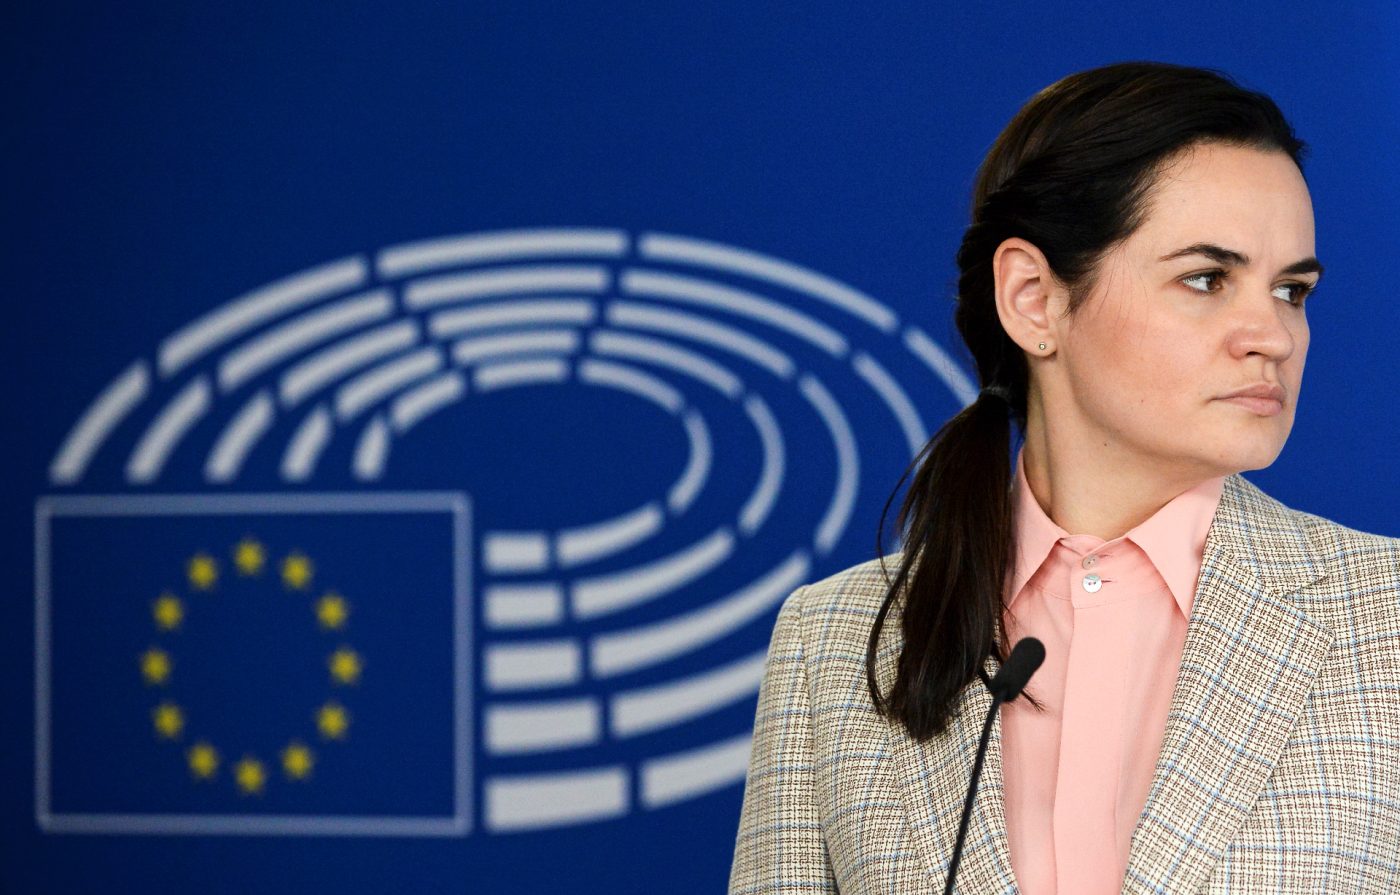 Photo: Belarusian opposition leader Sviatlana Tsikhanouskaya attends a news conference with European Parliament President David Sassoli (not pictured), in Brussels Belgium September 21, 2020. Credit: REUTERS/Johanna Geron/Pool